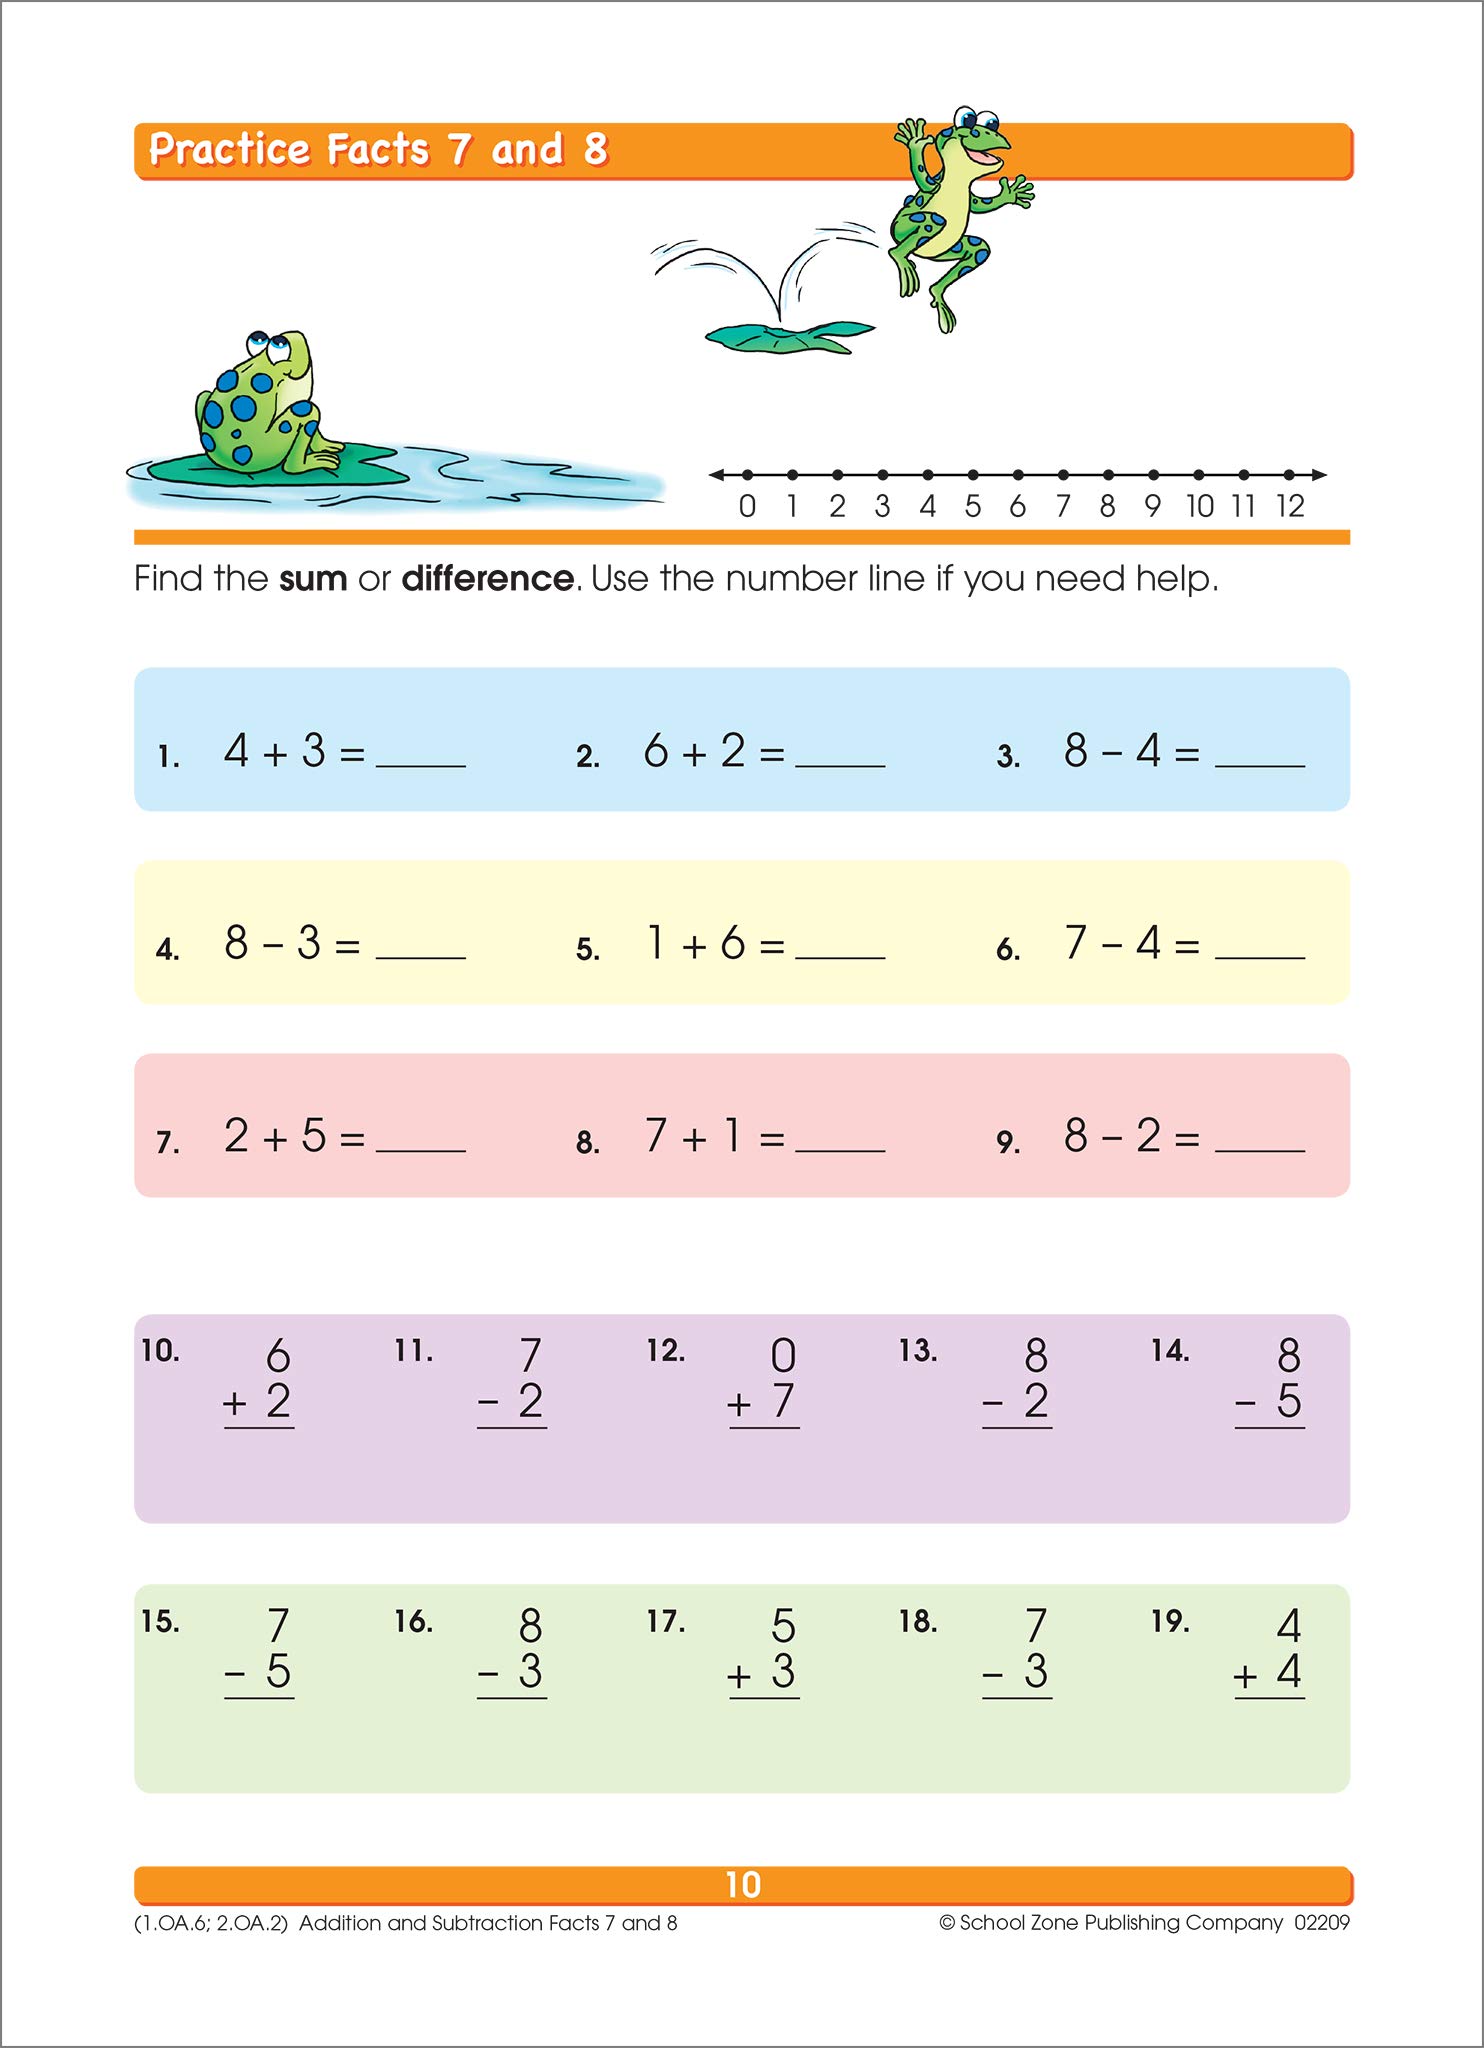 School Zone - Addition & Subtraction Workbook - 64 Pages, Ages 6 to 8, 1st & 2nd Grade Math, Place Value, Regrouping, Fact Tables, and More (School Zone I Know It!® Workbook Series)